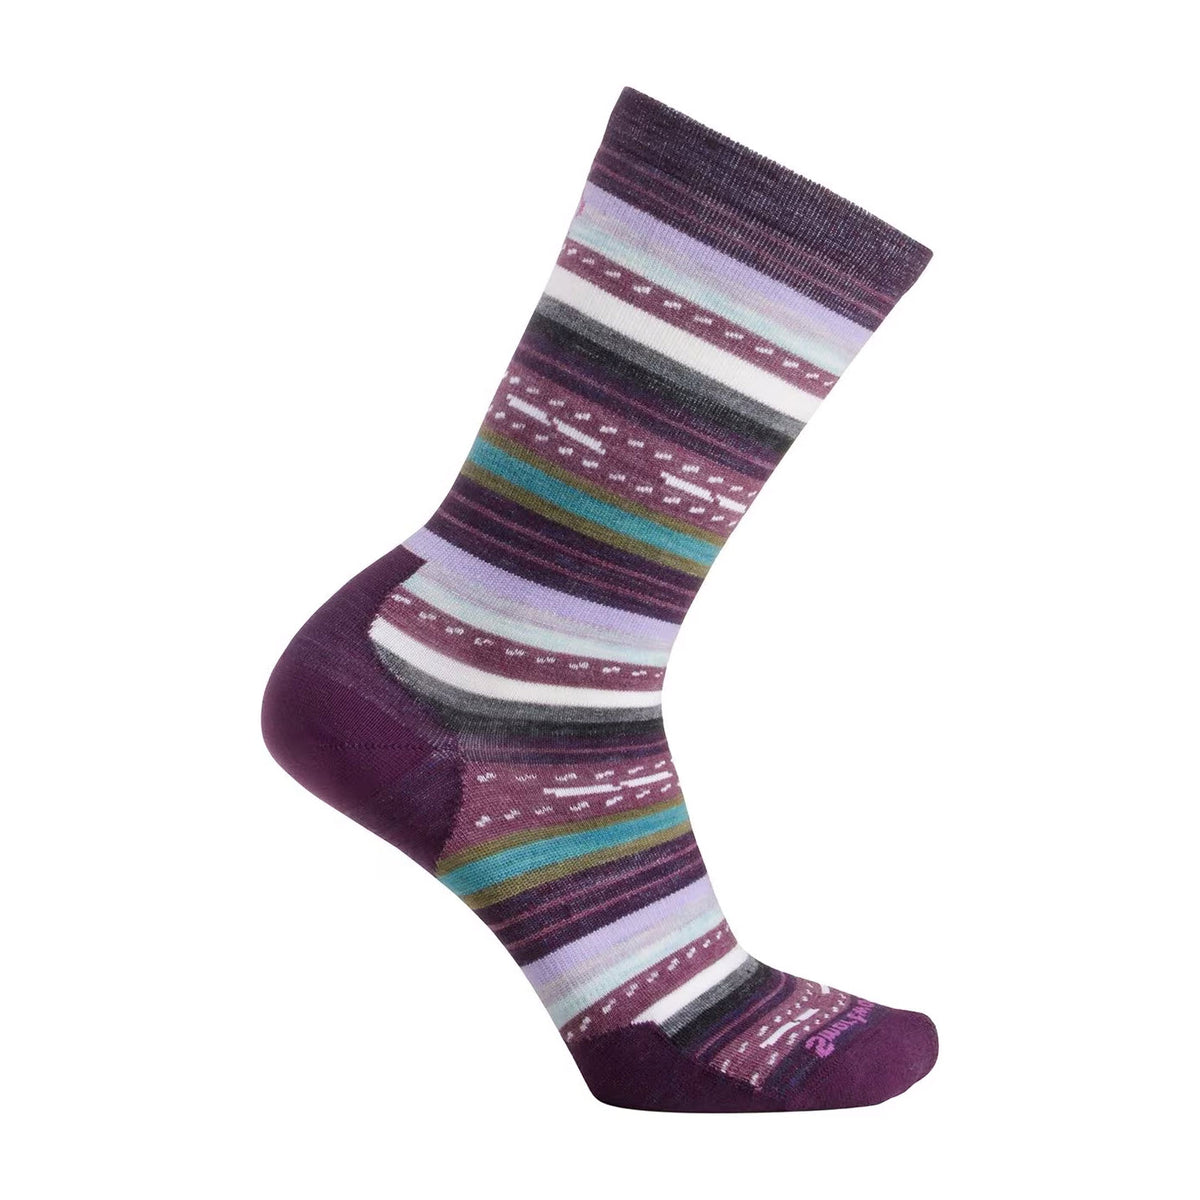 The Smartwool SMARTWOOL MARGARITA CREW SOCKS PURPLE - WOMENS feature a vibrant purple shade adorned with horizontal stripes in white, green, and pink. These Merino socks offer comfort combined with Shred Shield technology for extra durability.